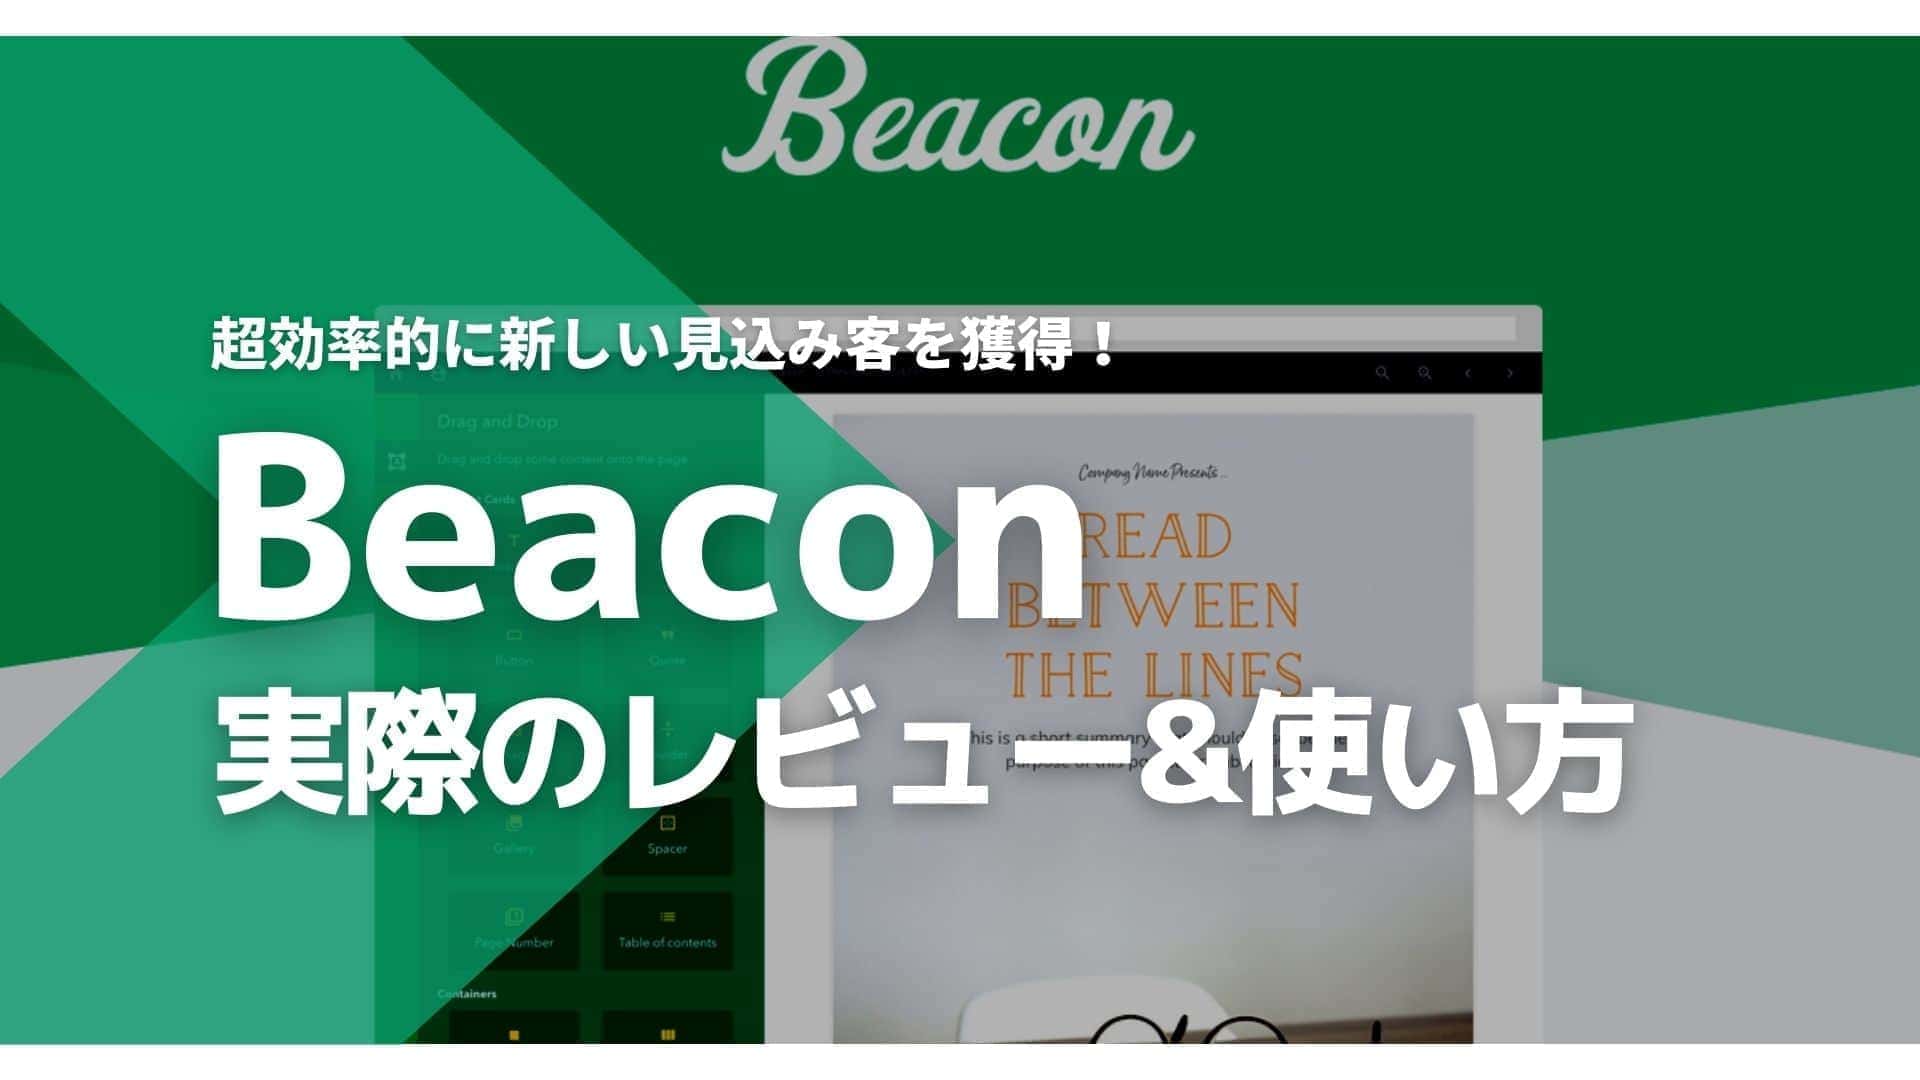 Reviews and Comments on Beacon